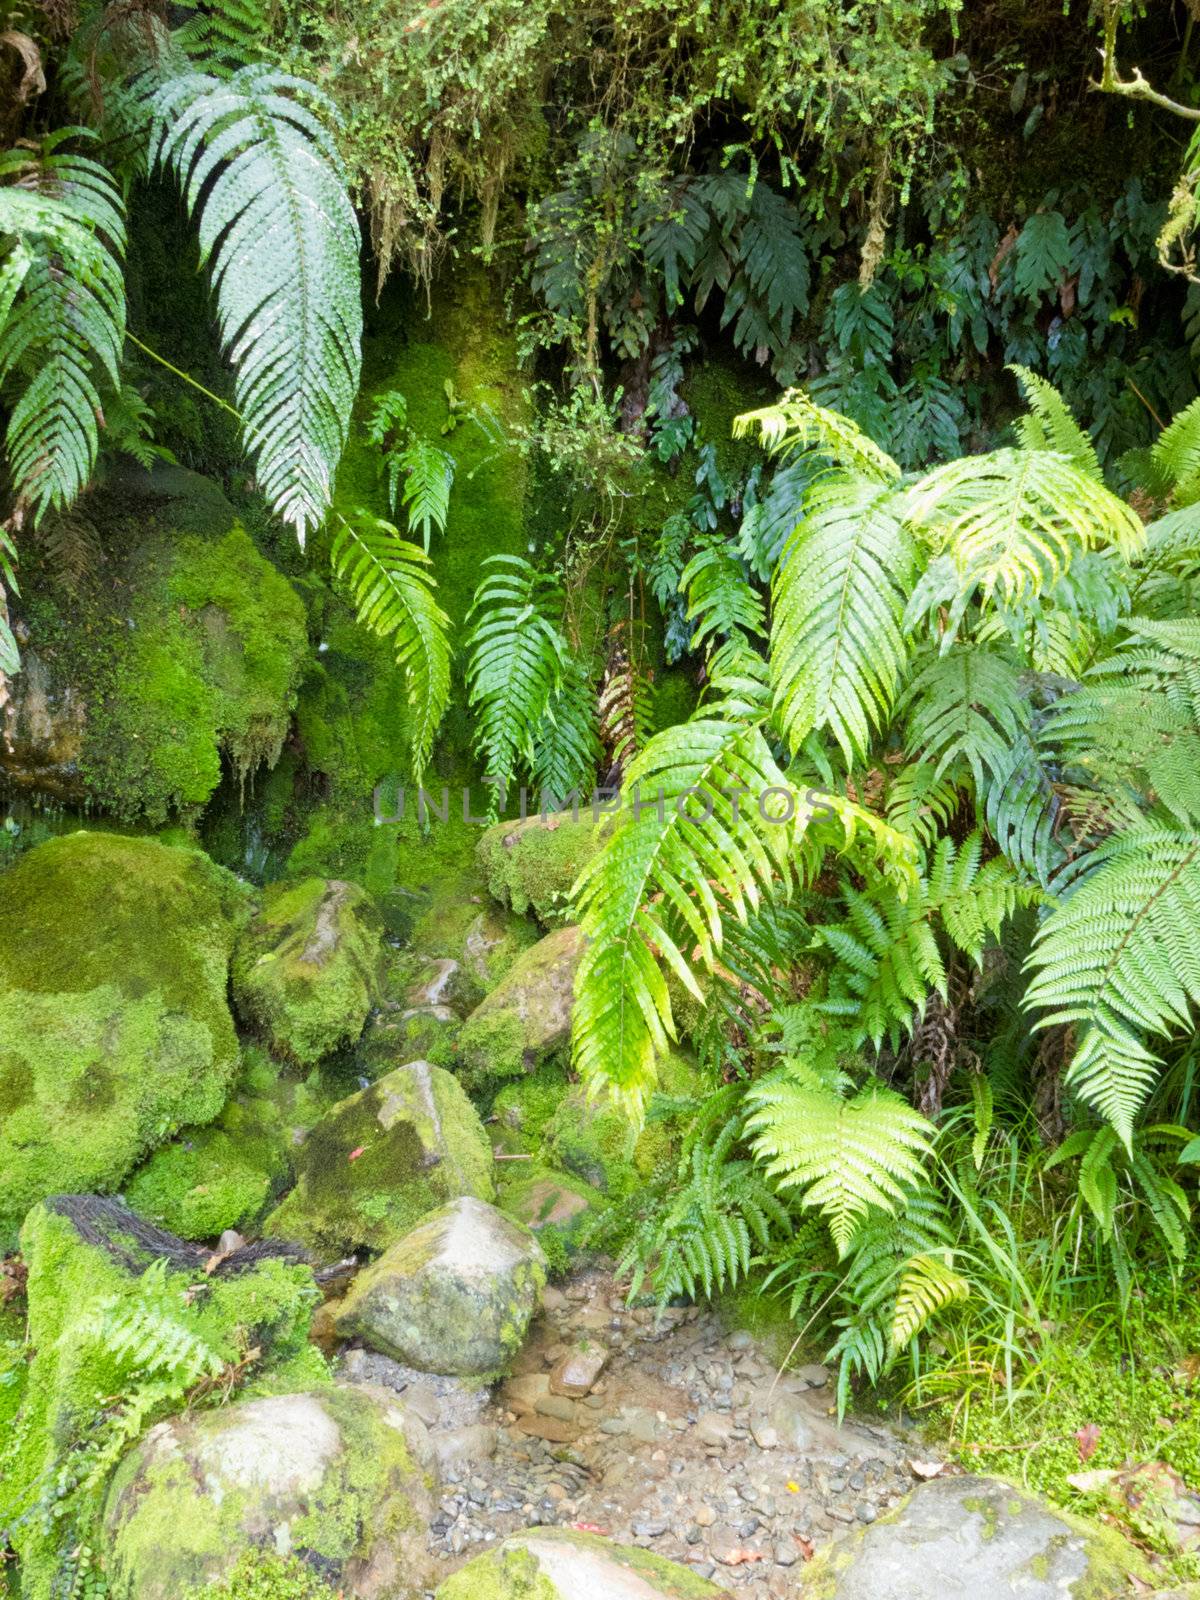 Spore forming plants, mossy rocks and lush ferns by PiLens